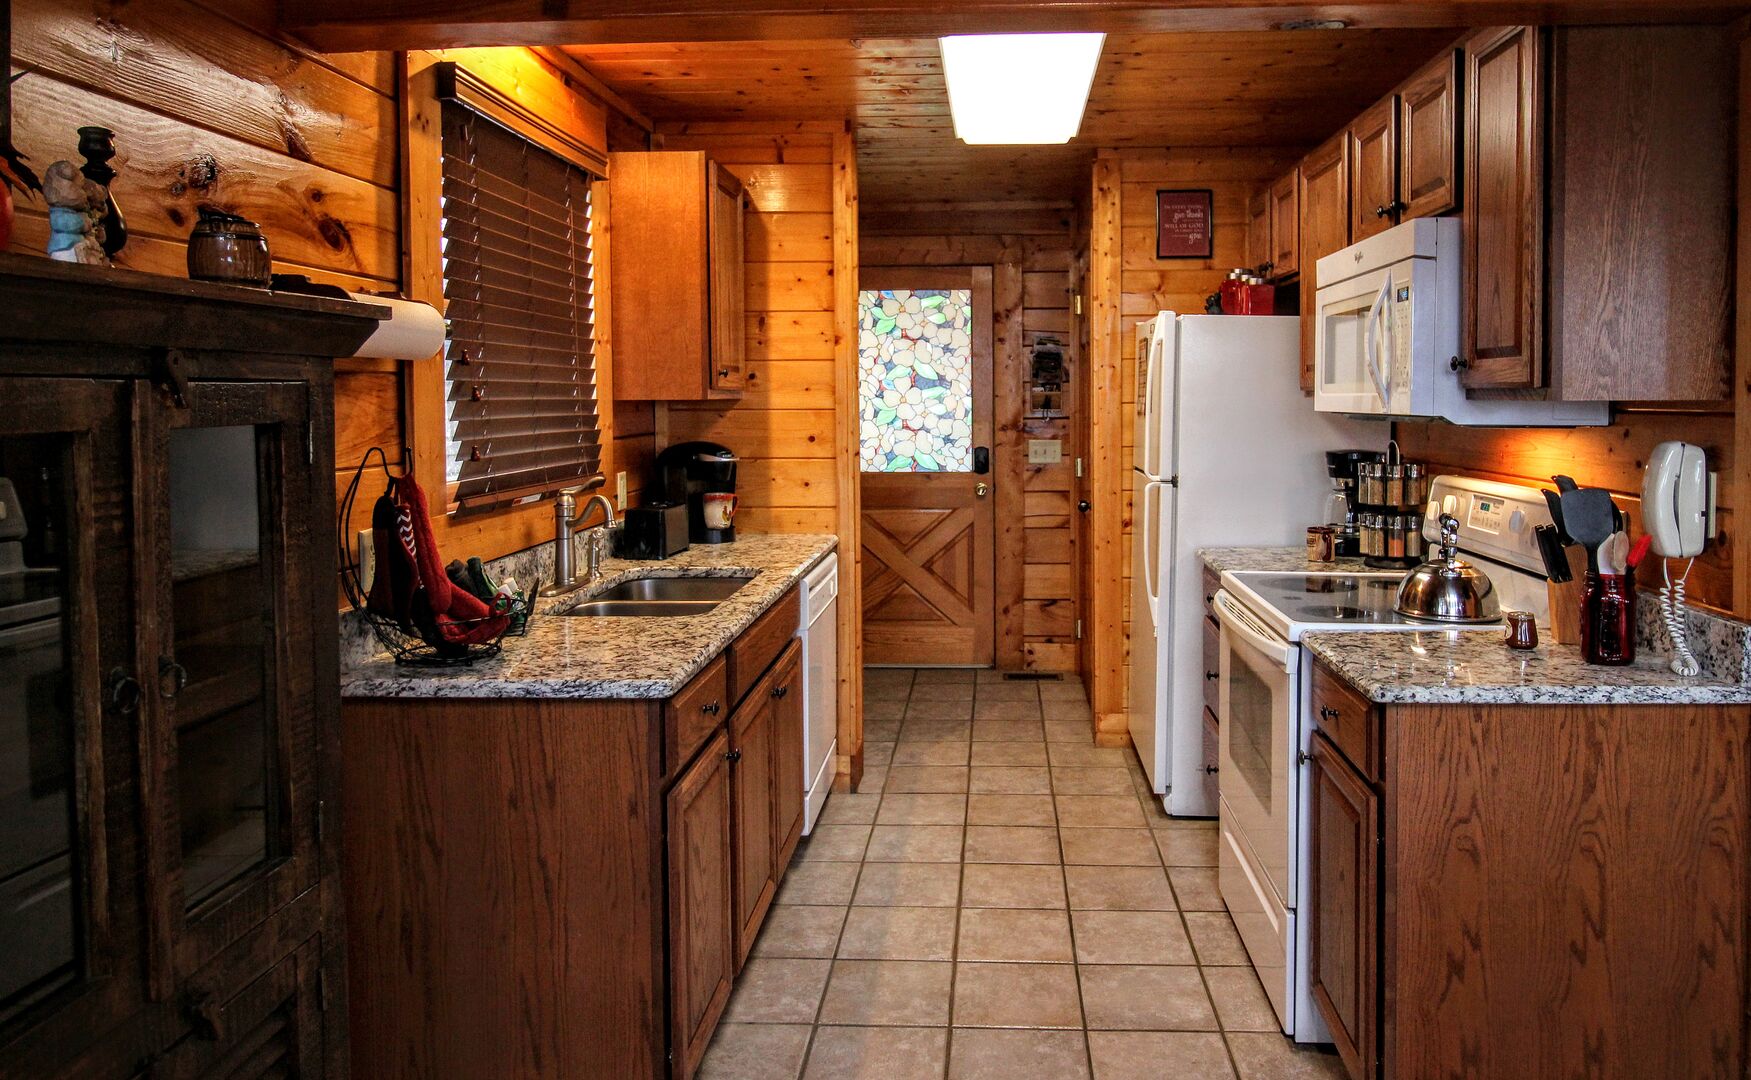 FULLY EQUIPPED KITCHEN INCLUDING A CUPBOARD TO STORE YOUR NON-PERISHABLES. NEW OAK CABINETS & GRANITE COUNTER TOPS THRU OUT CABIN.